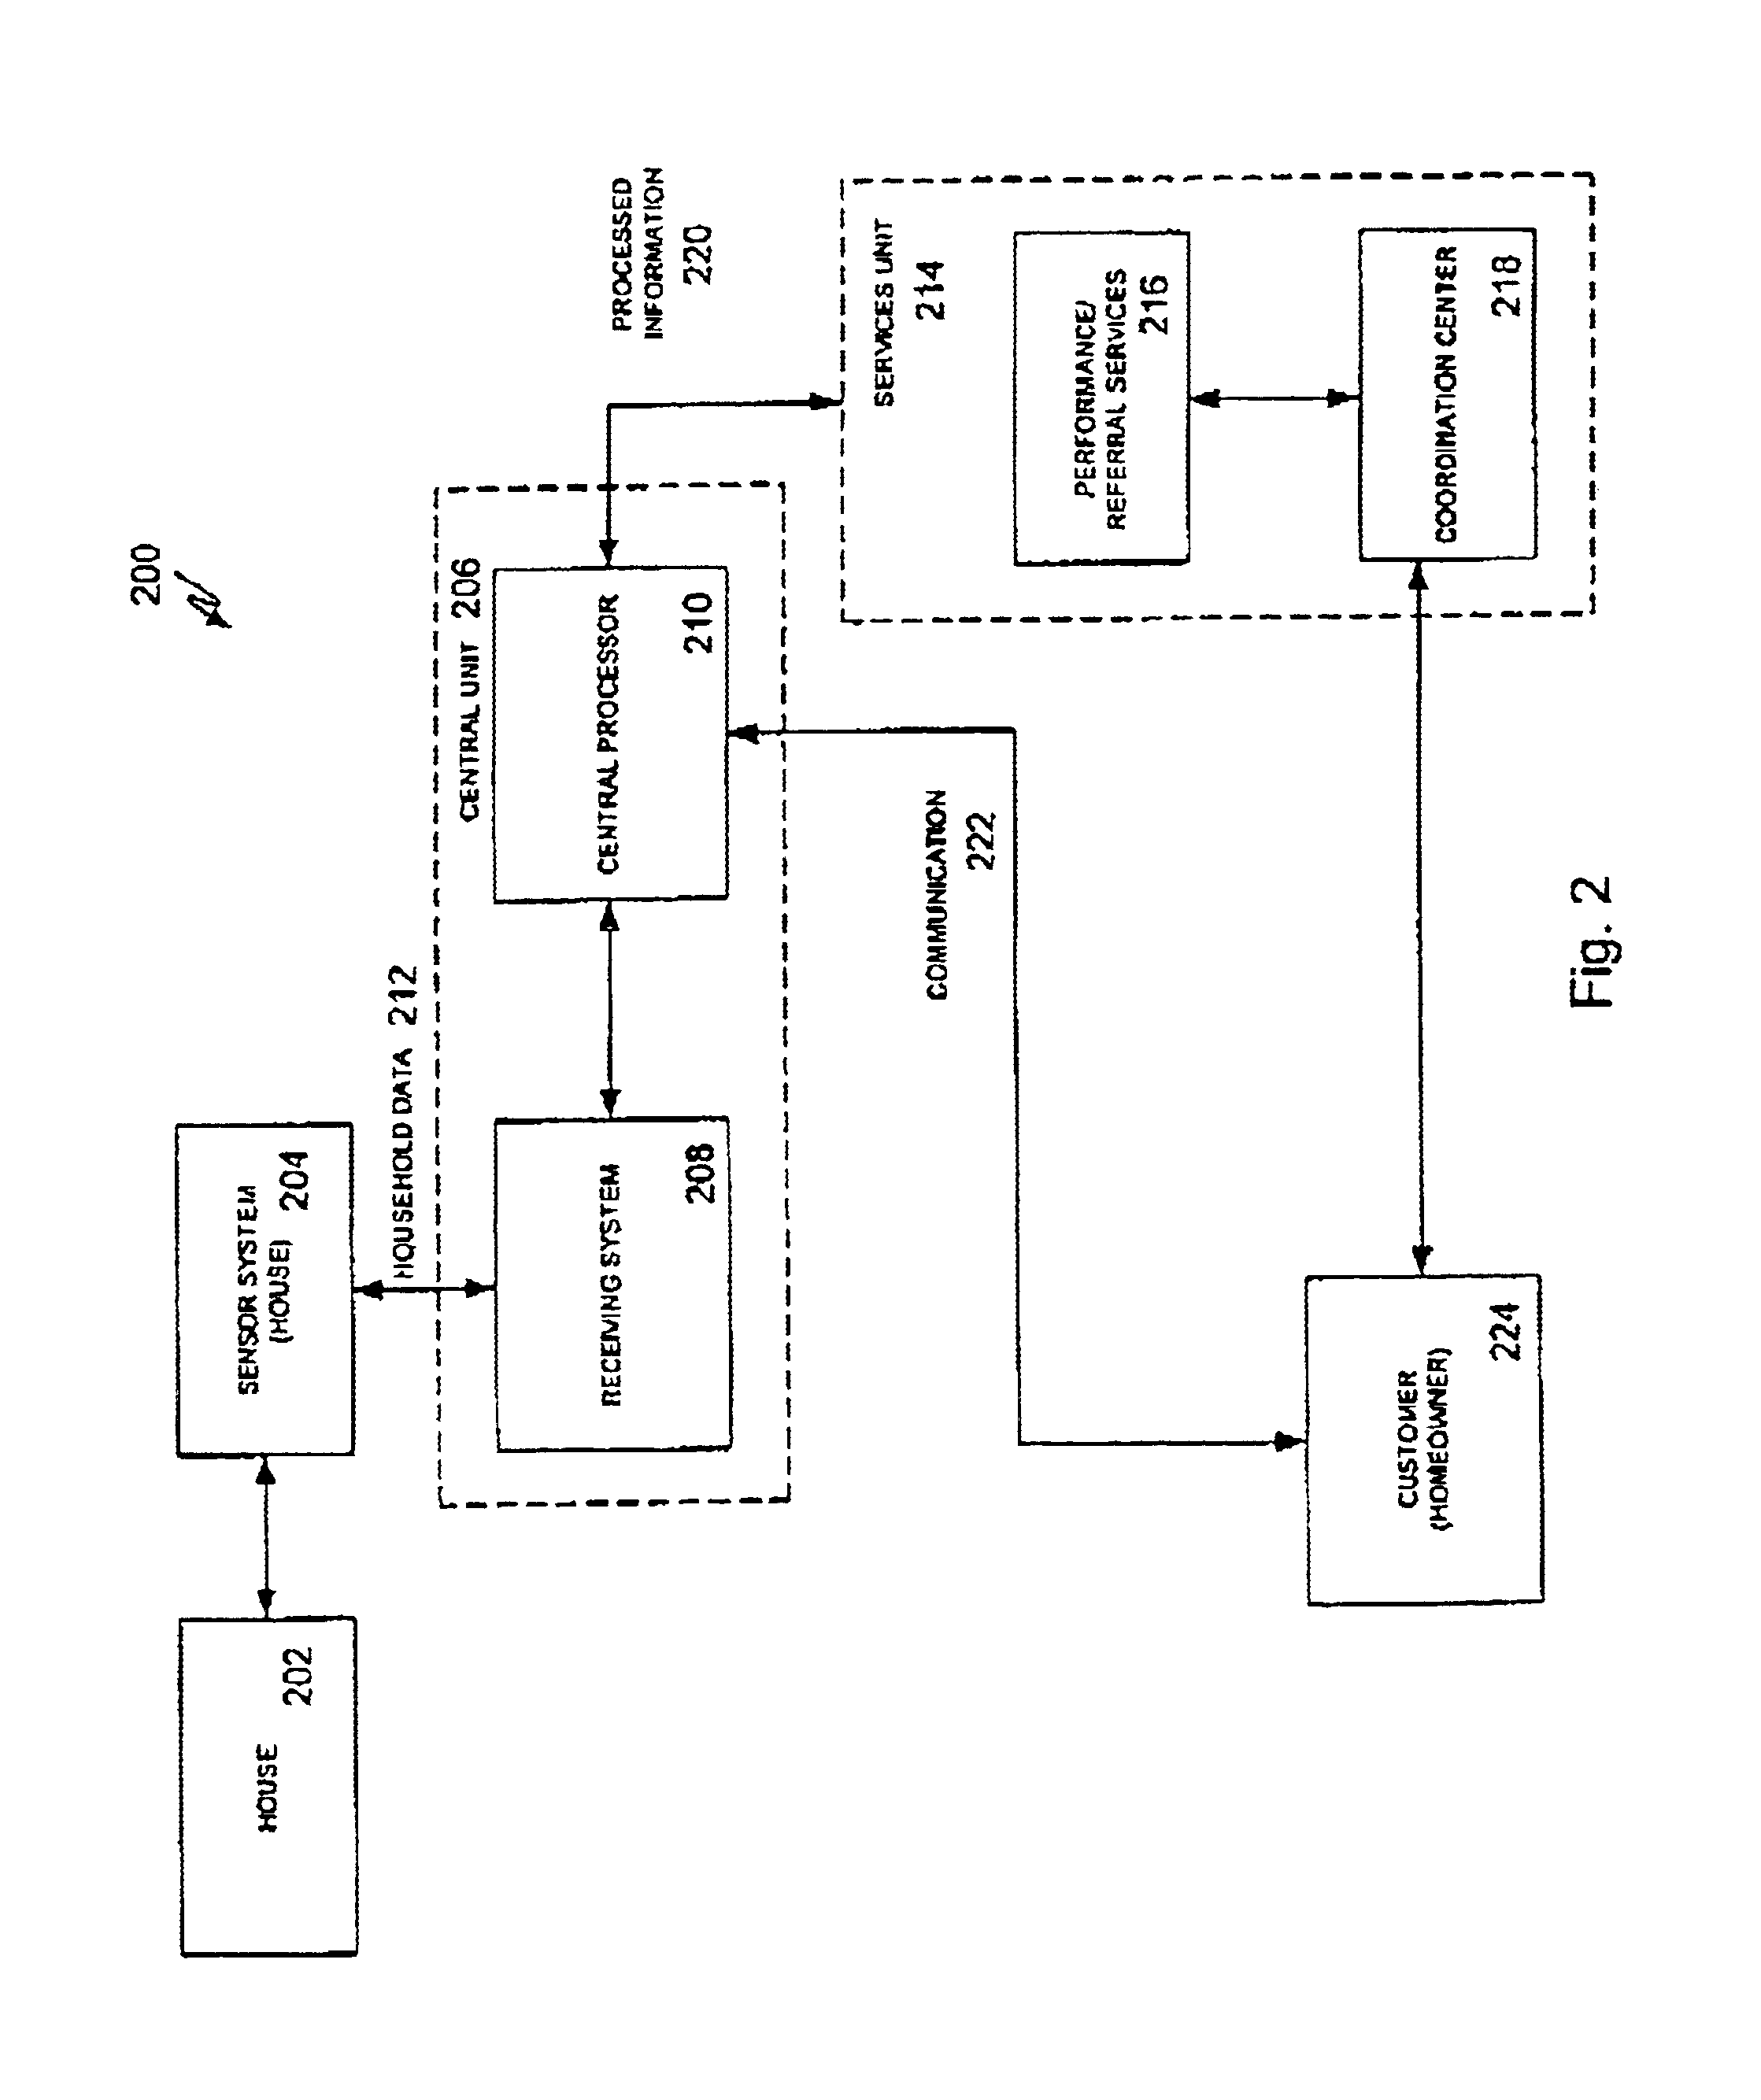 System and method for collecting and disseminating household information and for coordinating repair and maintenance services